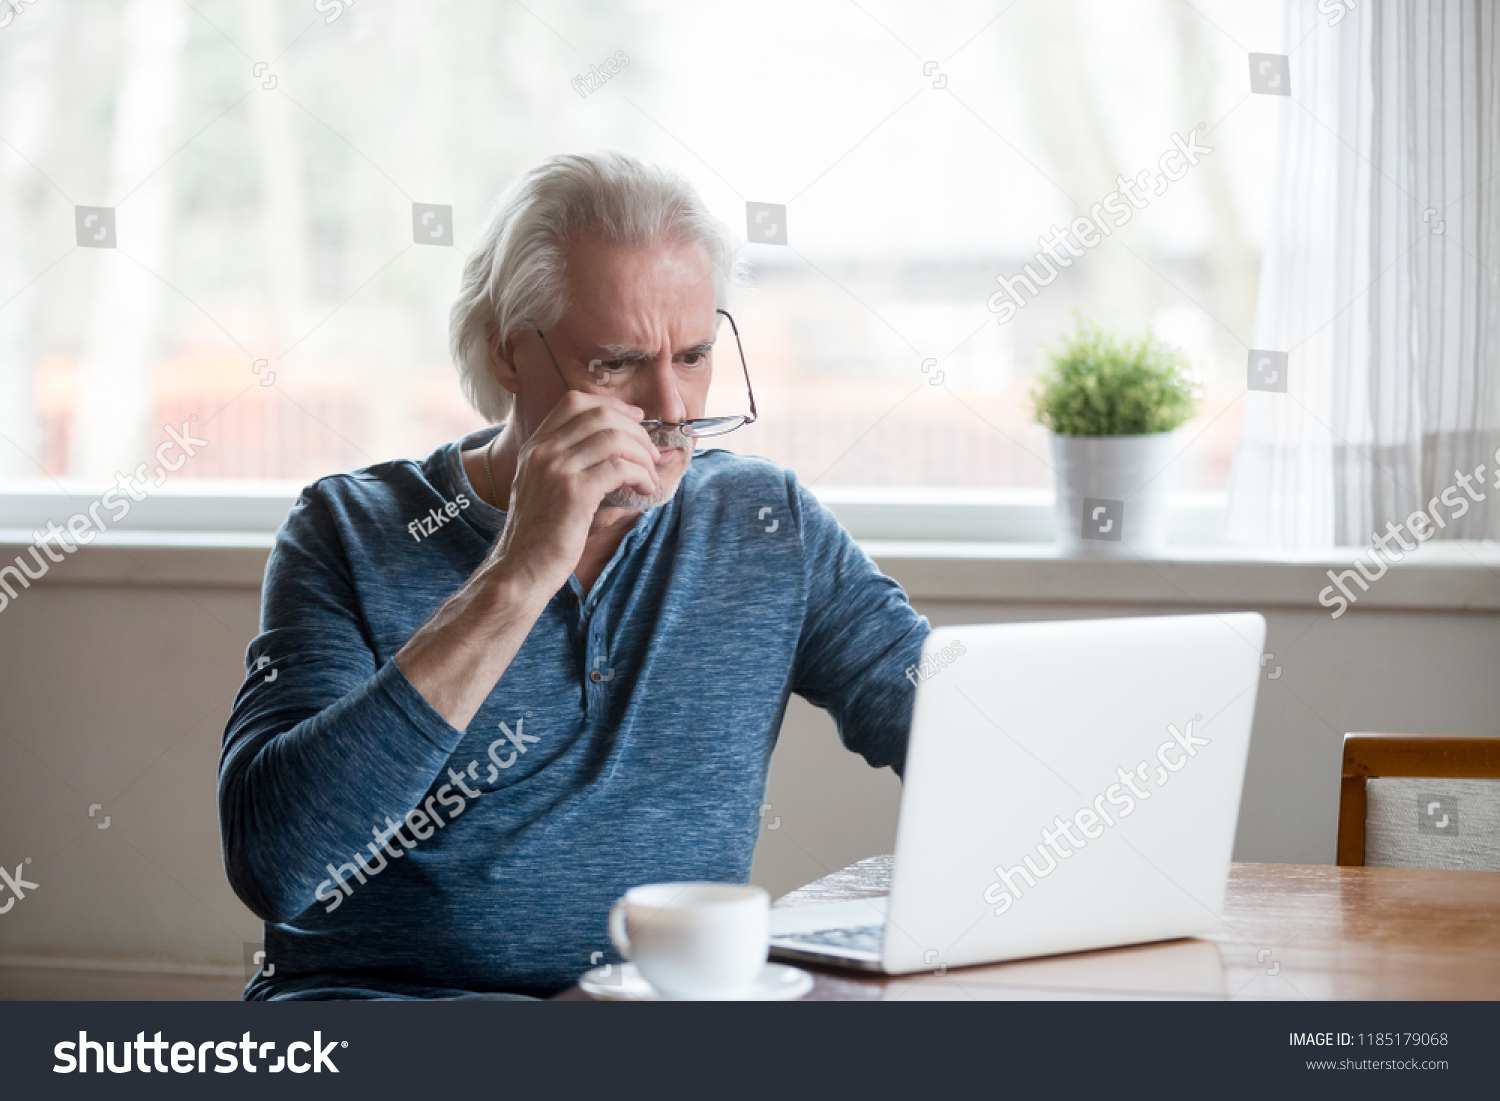 Shocked frustrated senior mature man taking off glasses to look at laptop reading shocking online news at home, stressed worried middle aged old male confused by bad email news or computer problem #1185179068